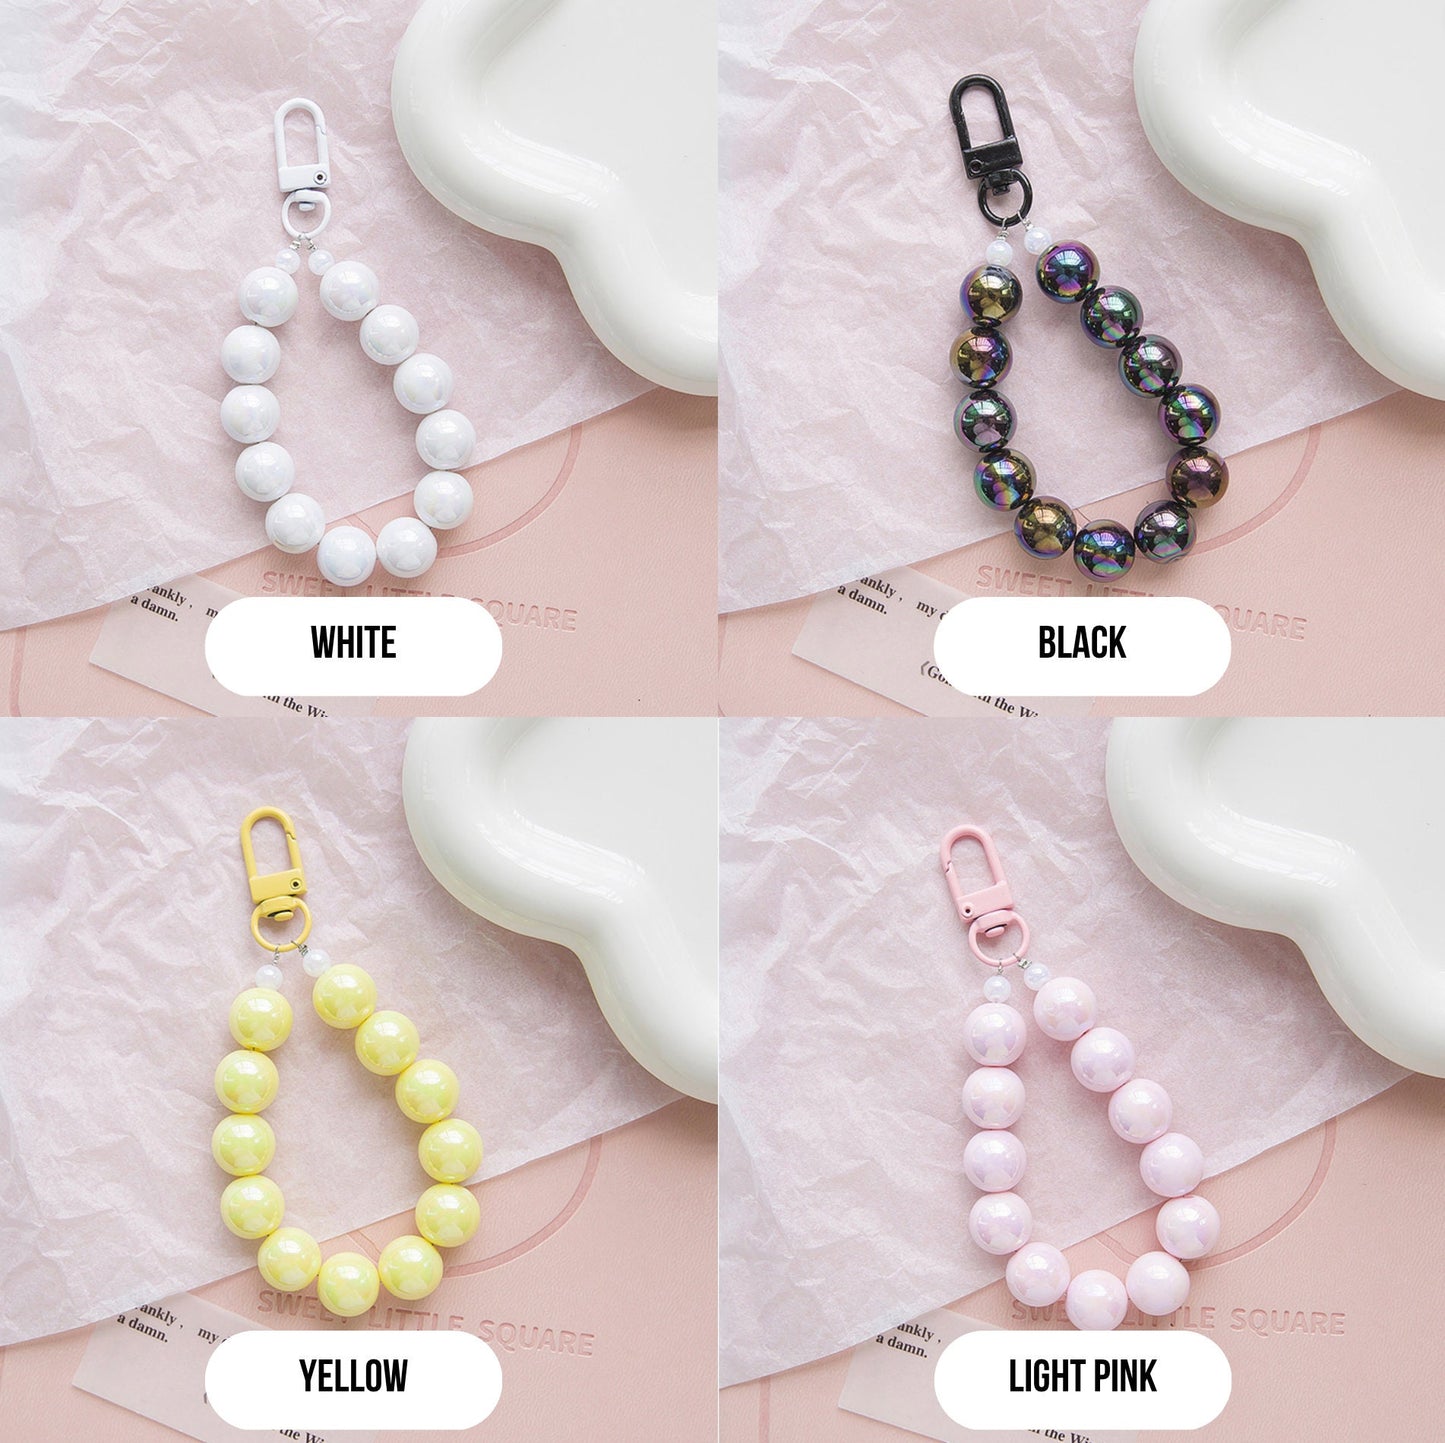 Simple Pearlescent Bead Strand Themed Keychain, Keyring, Lanyard, Phone Accessories